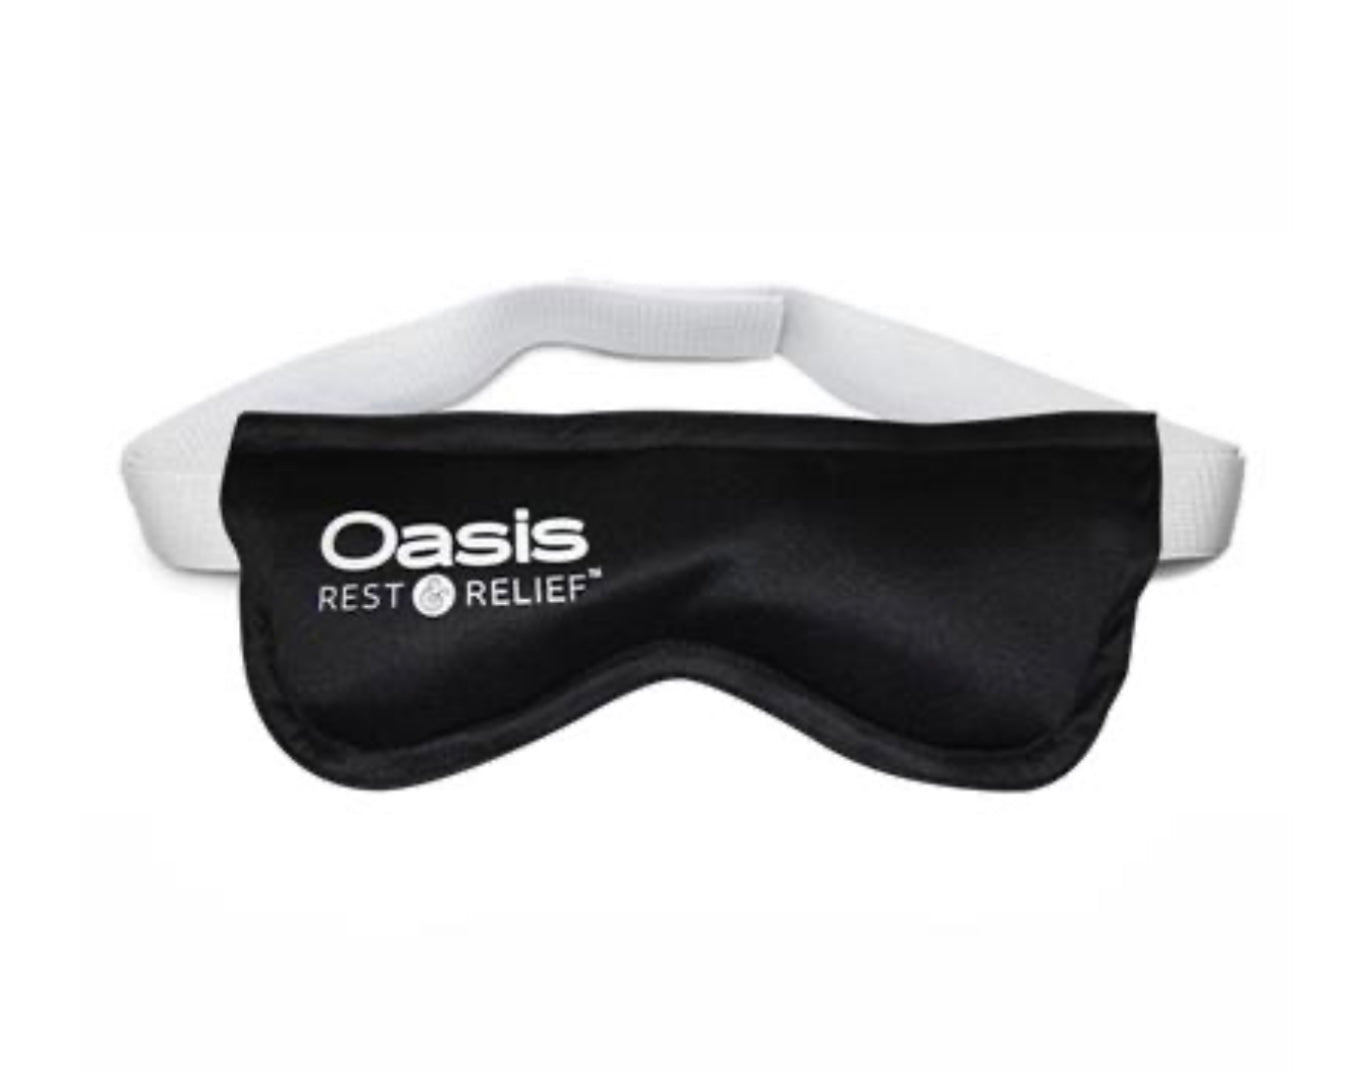 OASIS REST & RELIEF® Hot & Cold Eye Mask